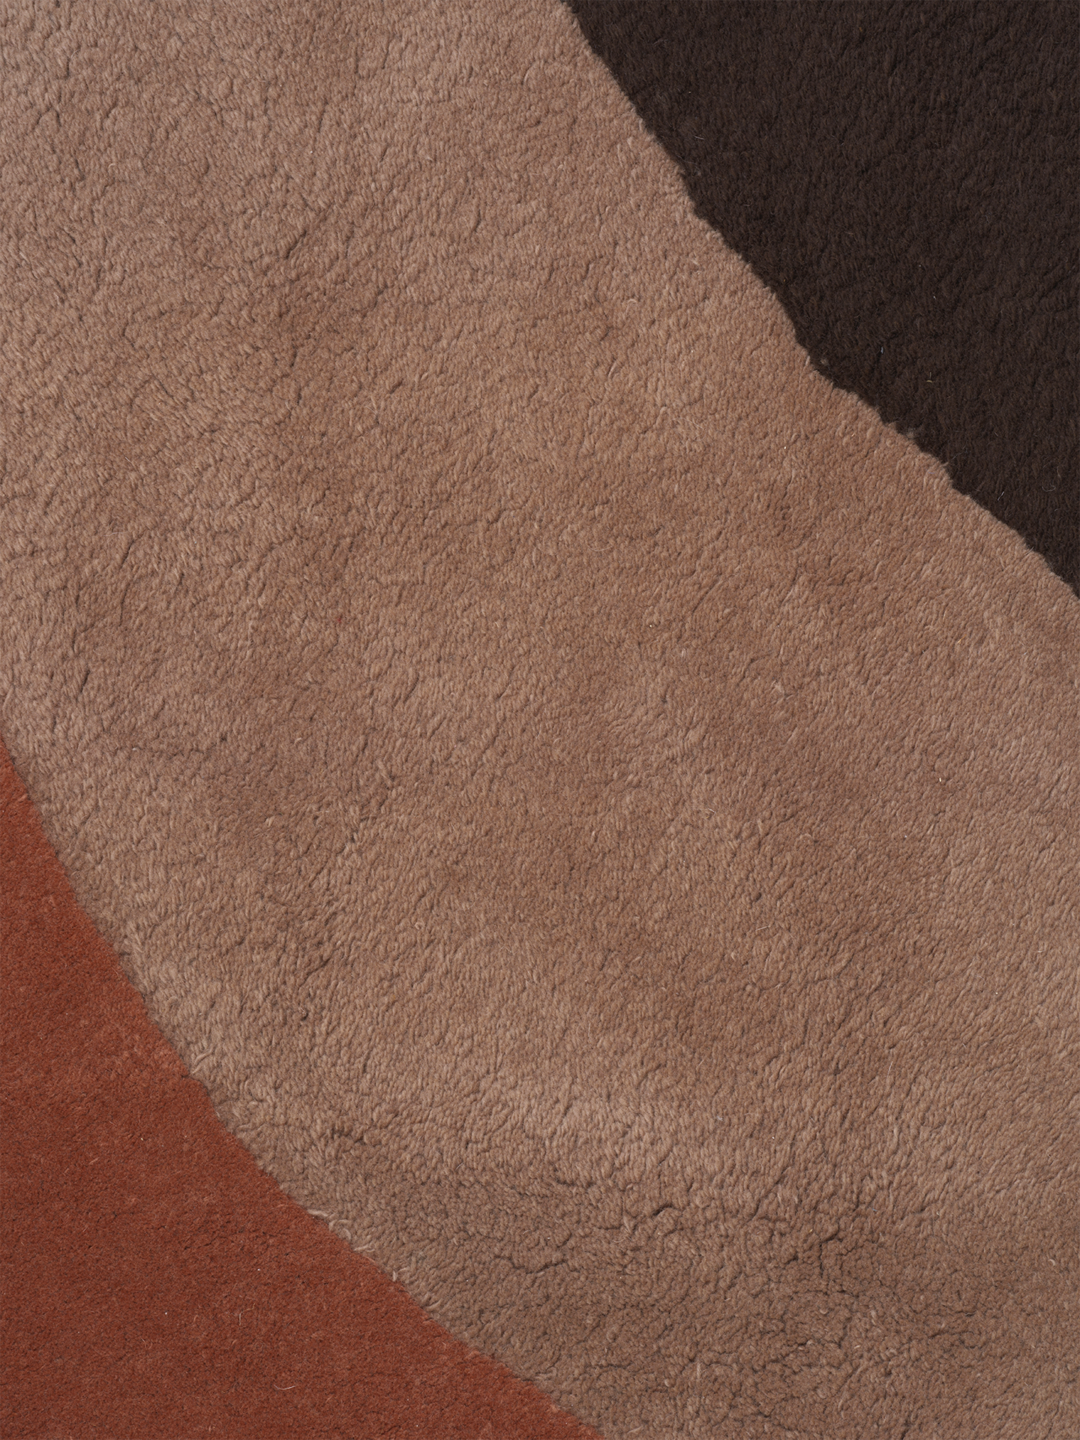 View Tufted Rug in Red Brown by Ferm Living